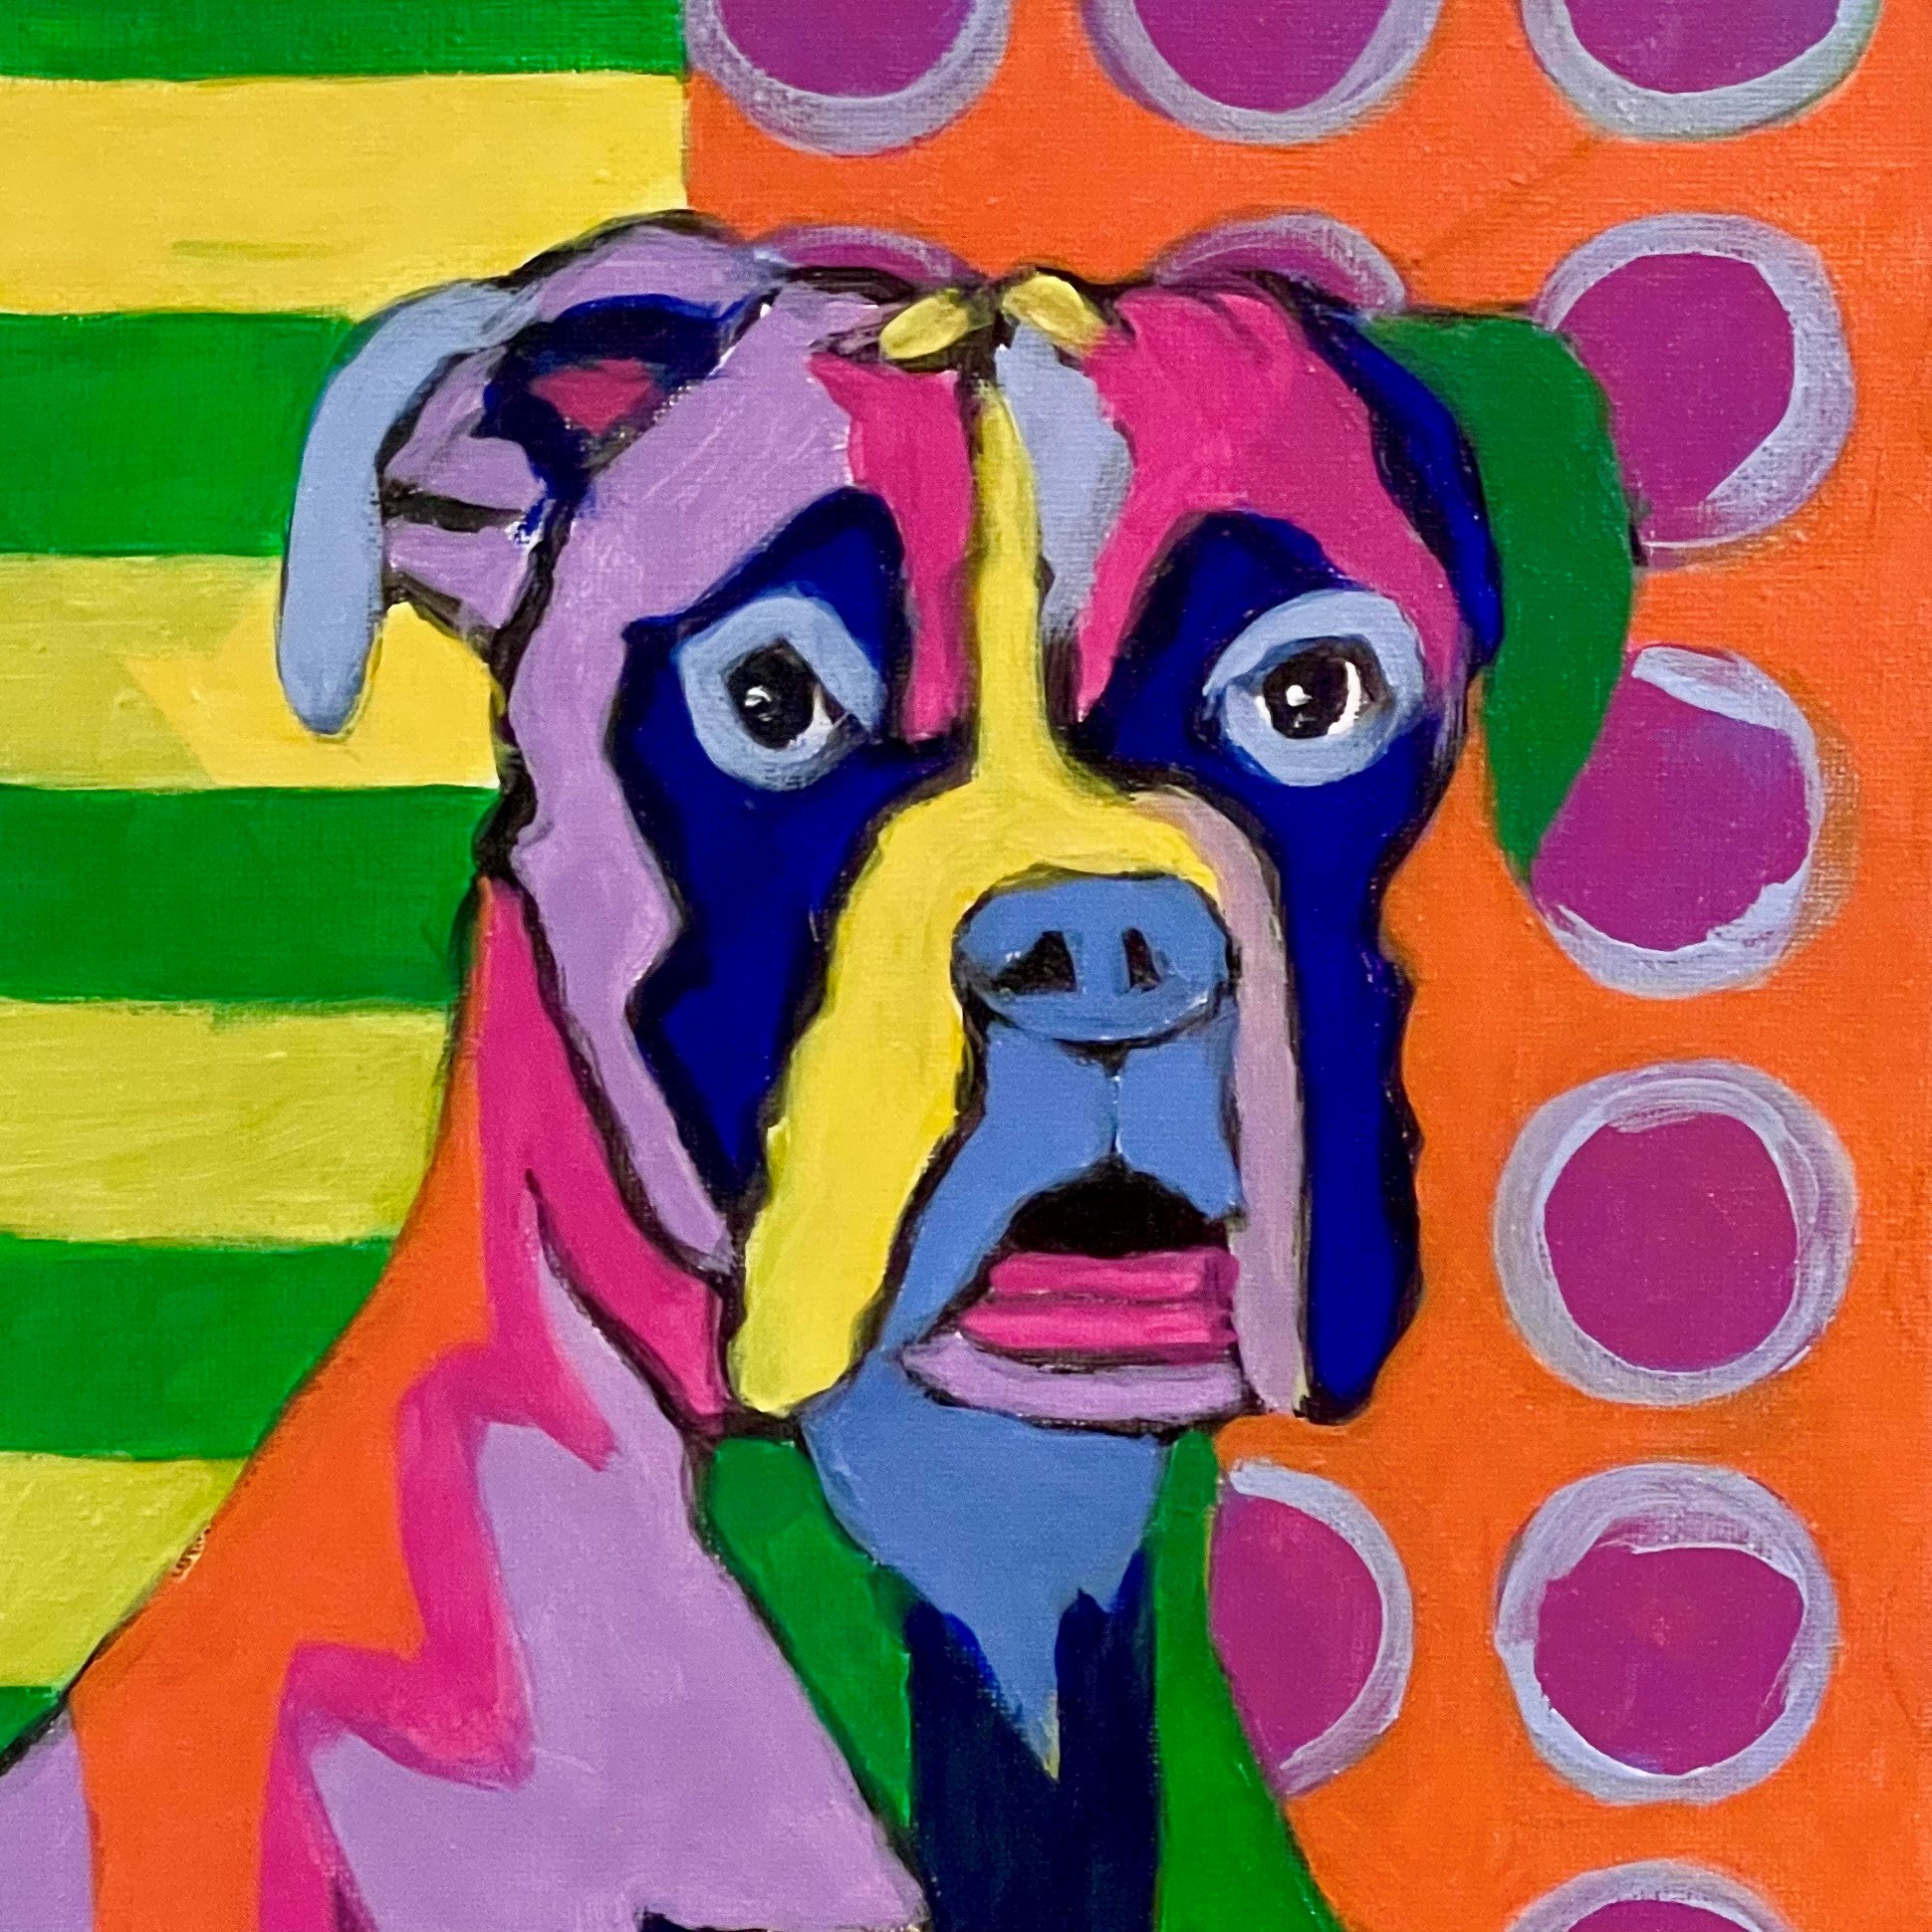 A painting of a bulldog using flat geometric shapes against a striped background